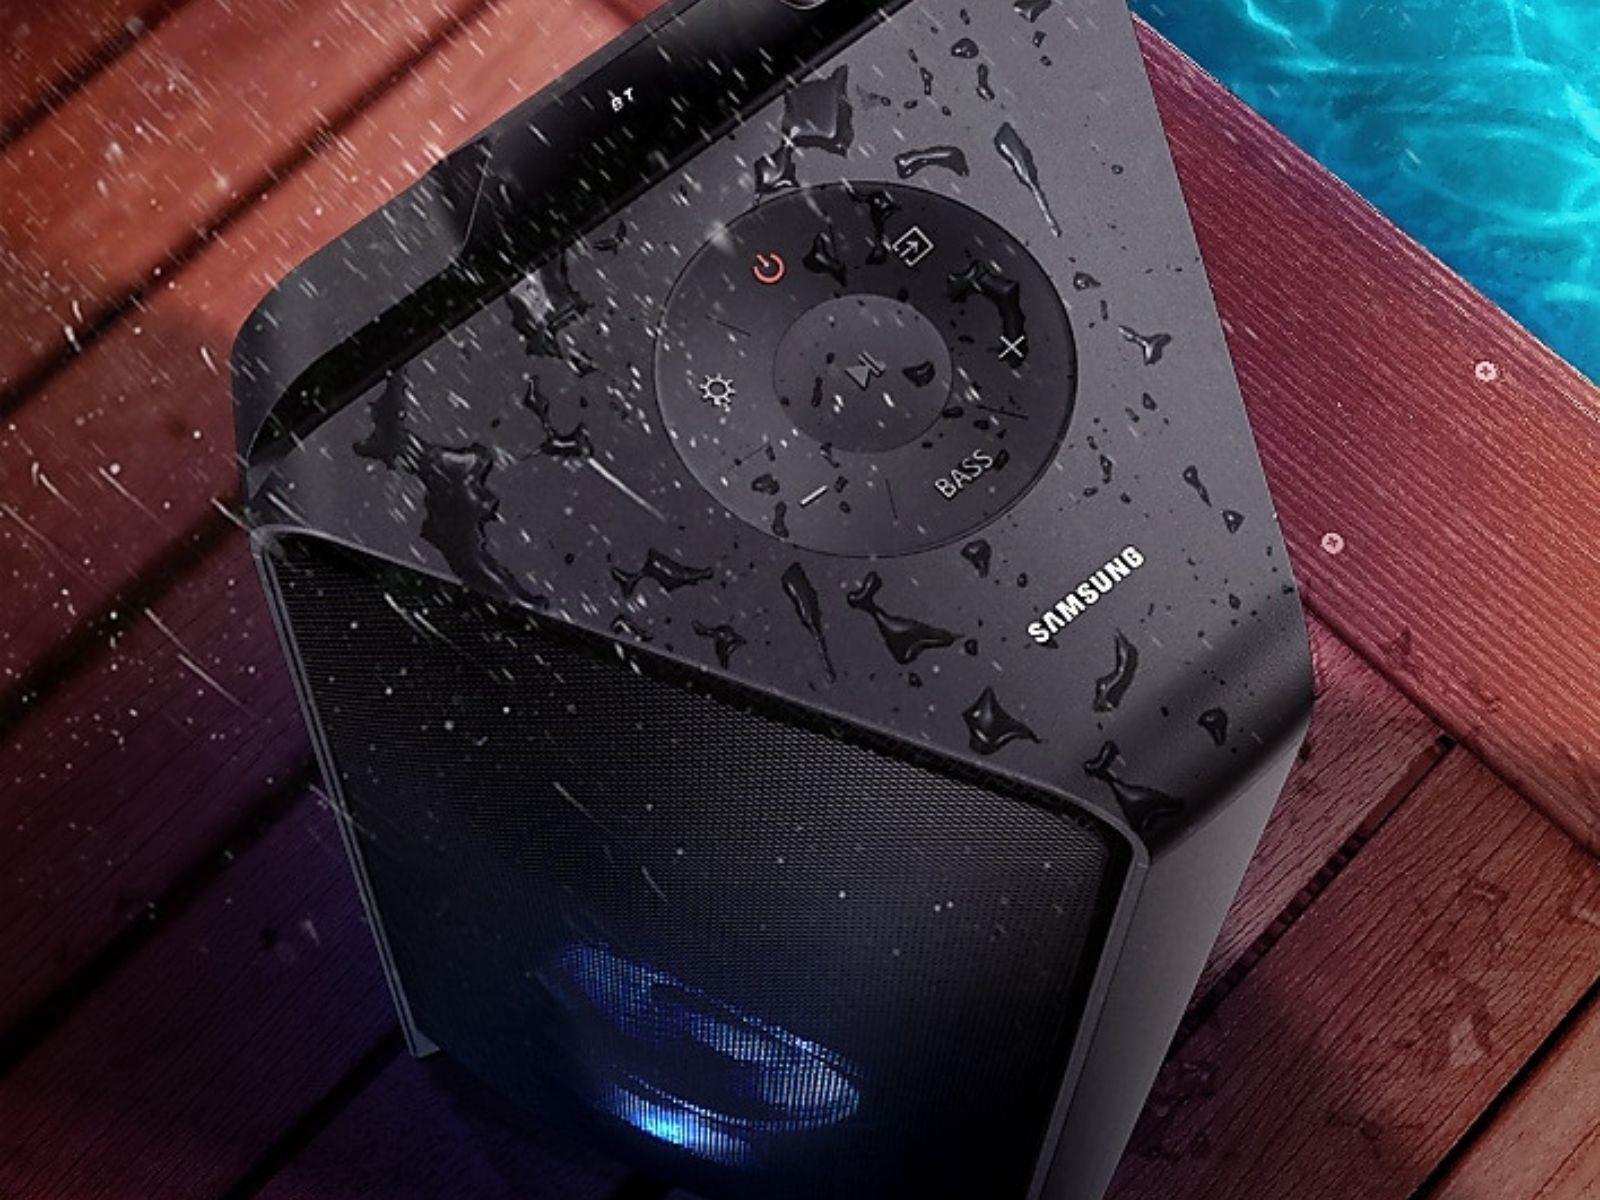 Control Panel Of The Samsung MX-T50 Sound Tower with water splashes